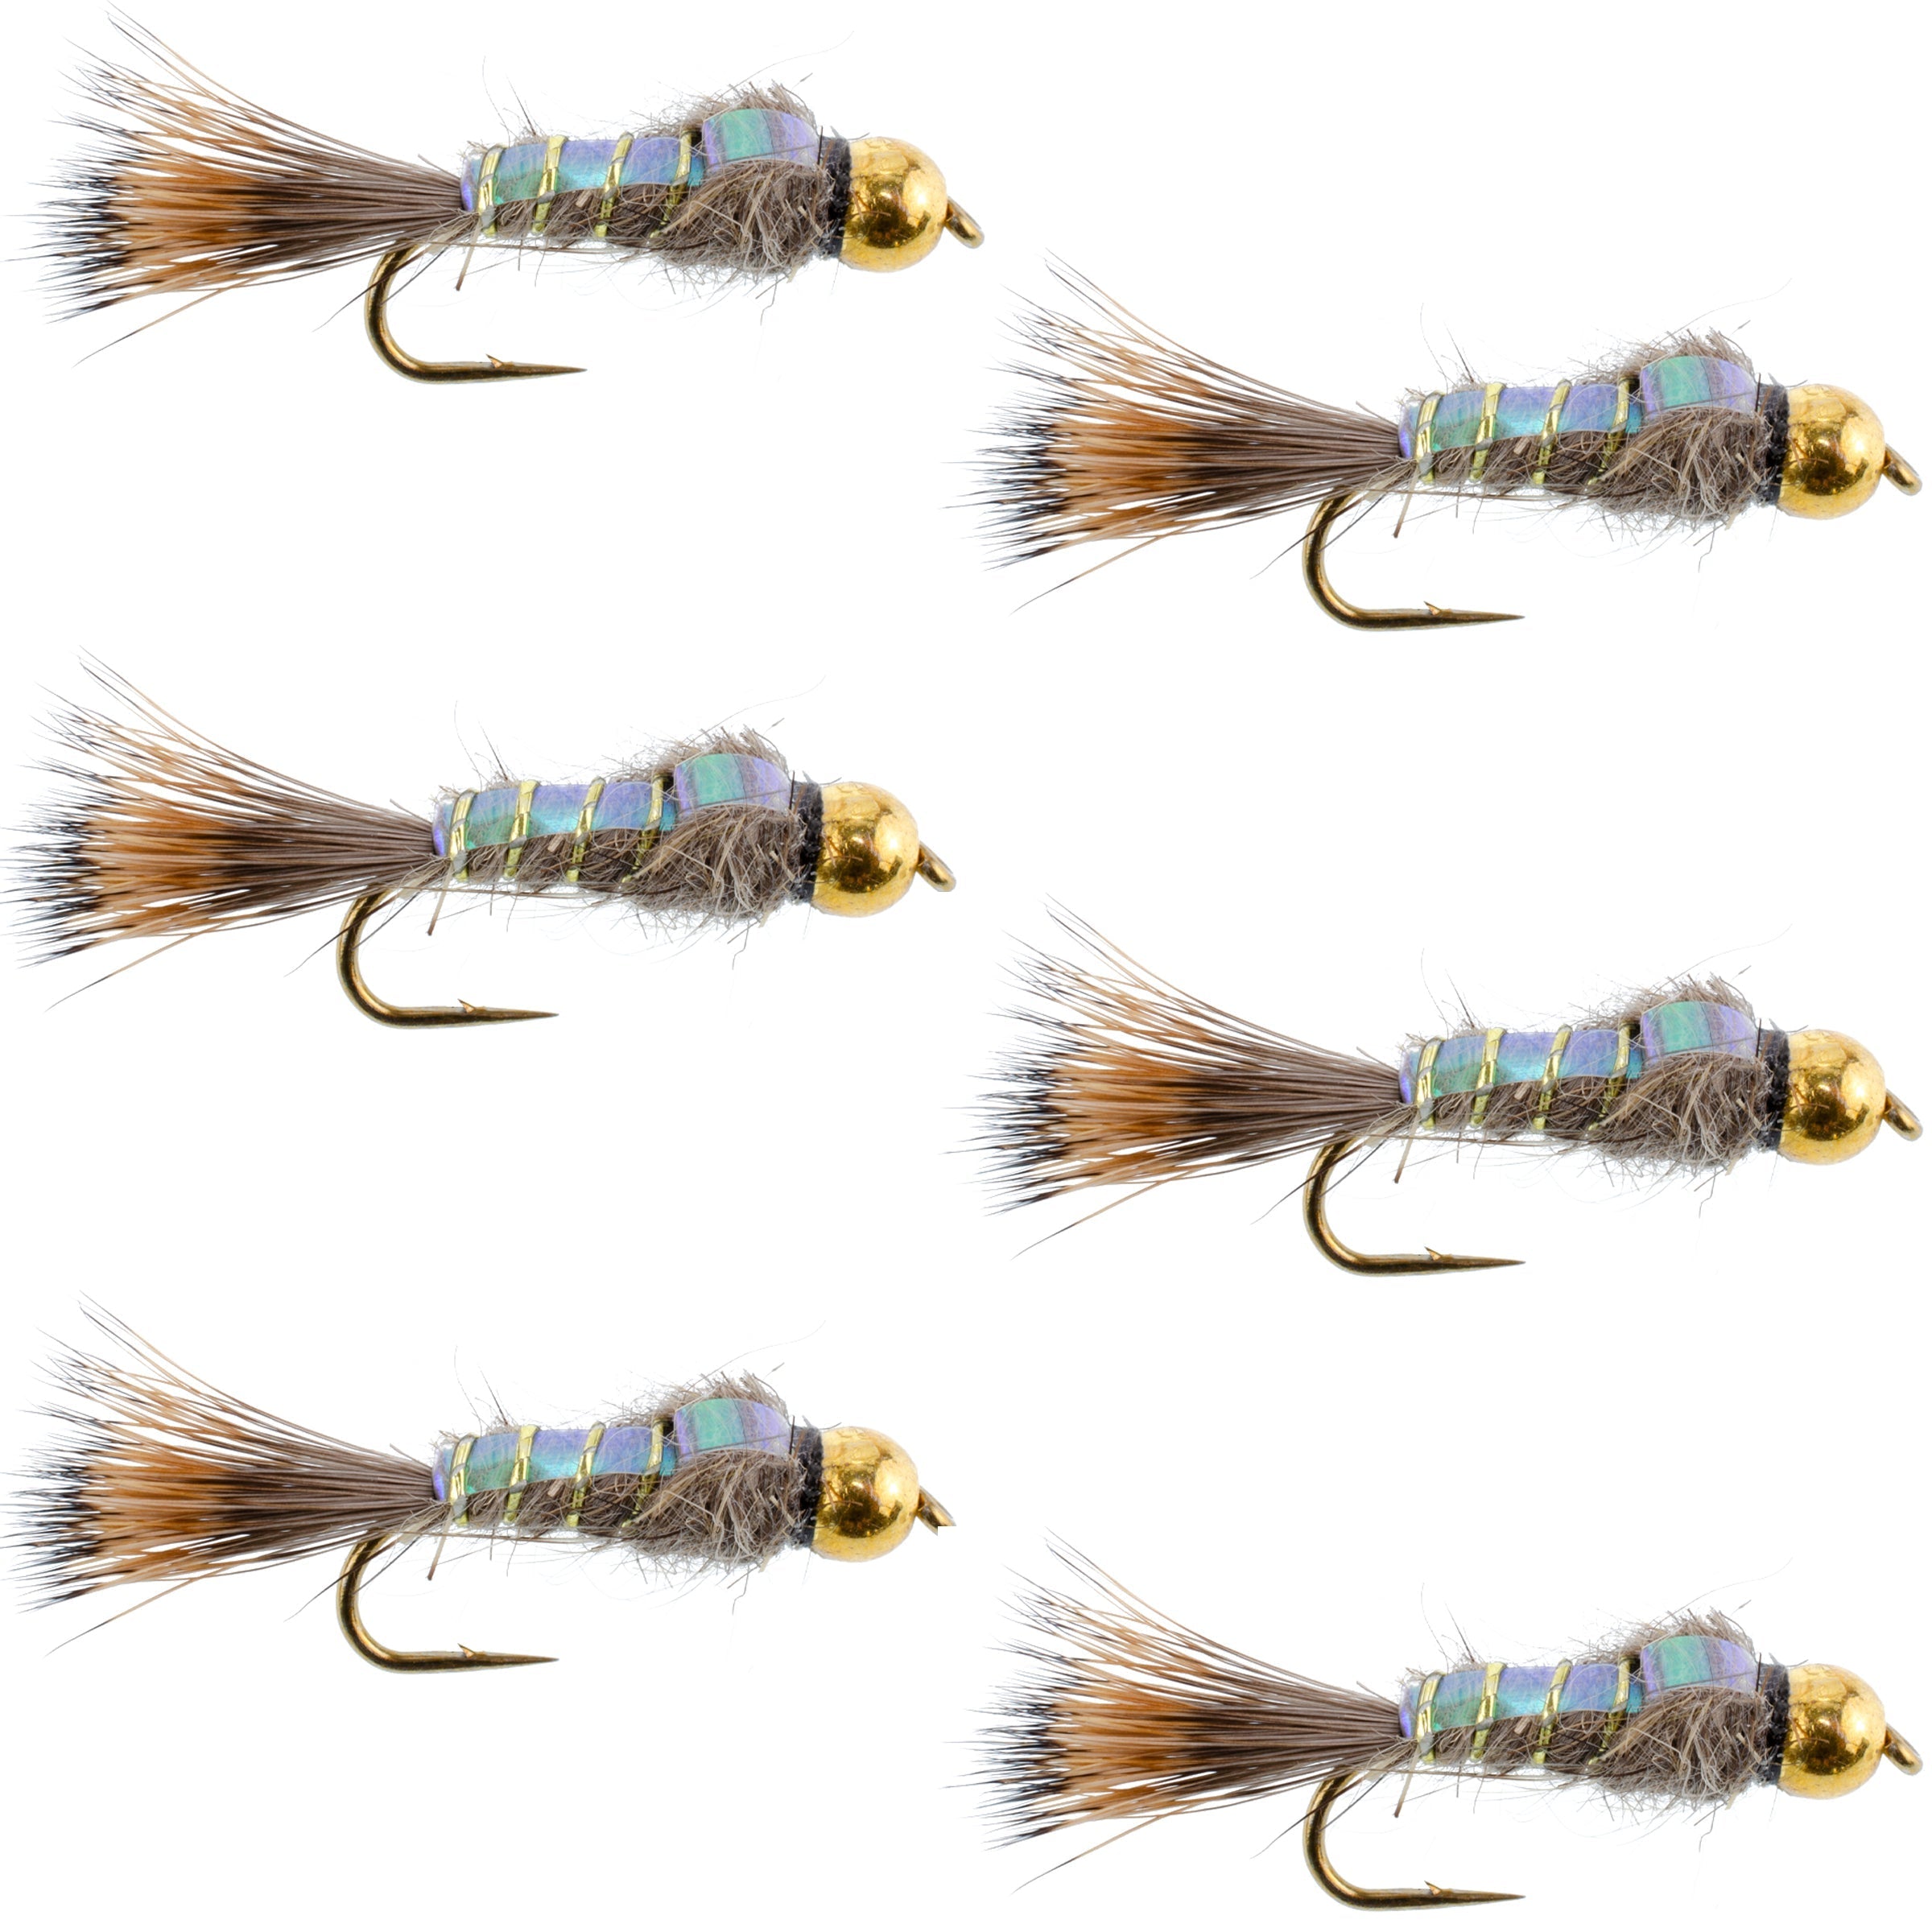 Tungsten Bead Head Nymph Fly Fishing Flies - Flashback Gold Ribbed Hare's Ear Trout Fly - Nymph Wet Fly - 6 Flies Hook Size 10